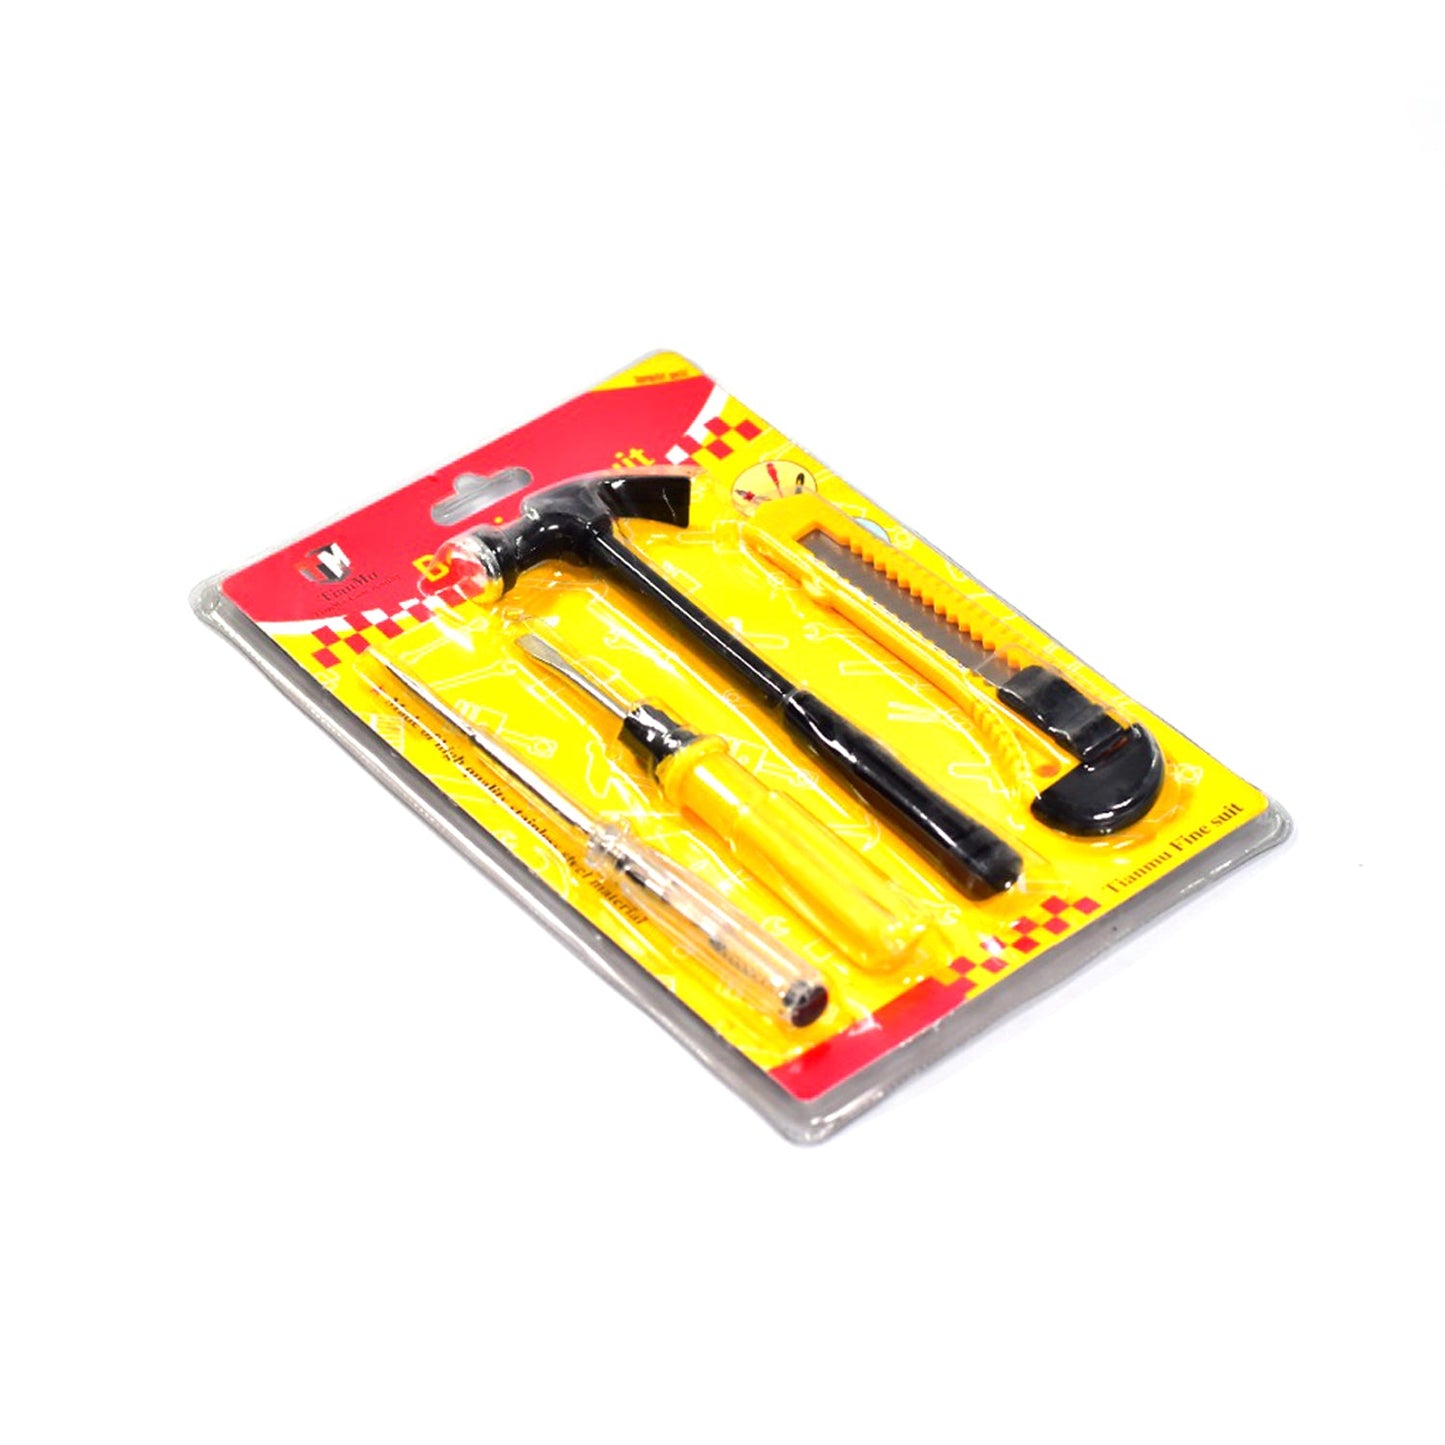 9187 Claw Hammer Cutter Tool Kit, Screw Driver Hand Tool Kit 